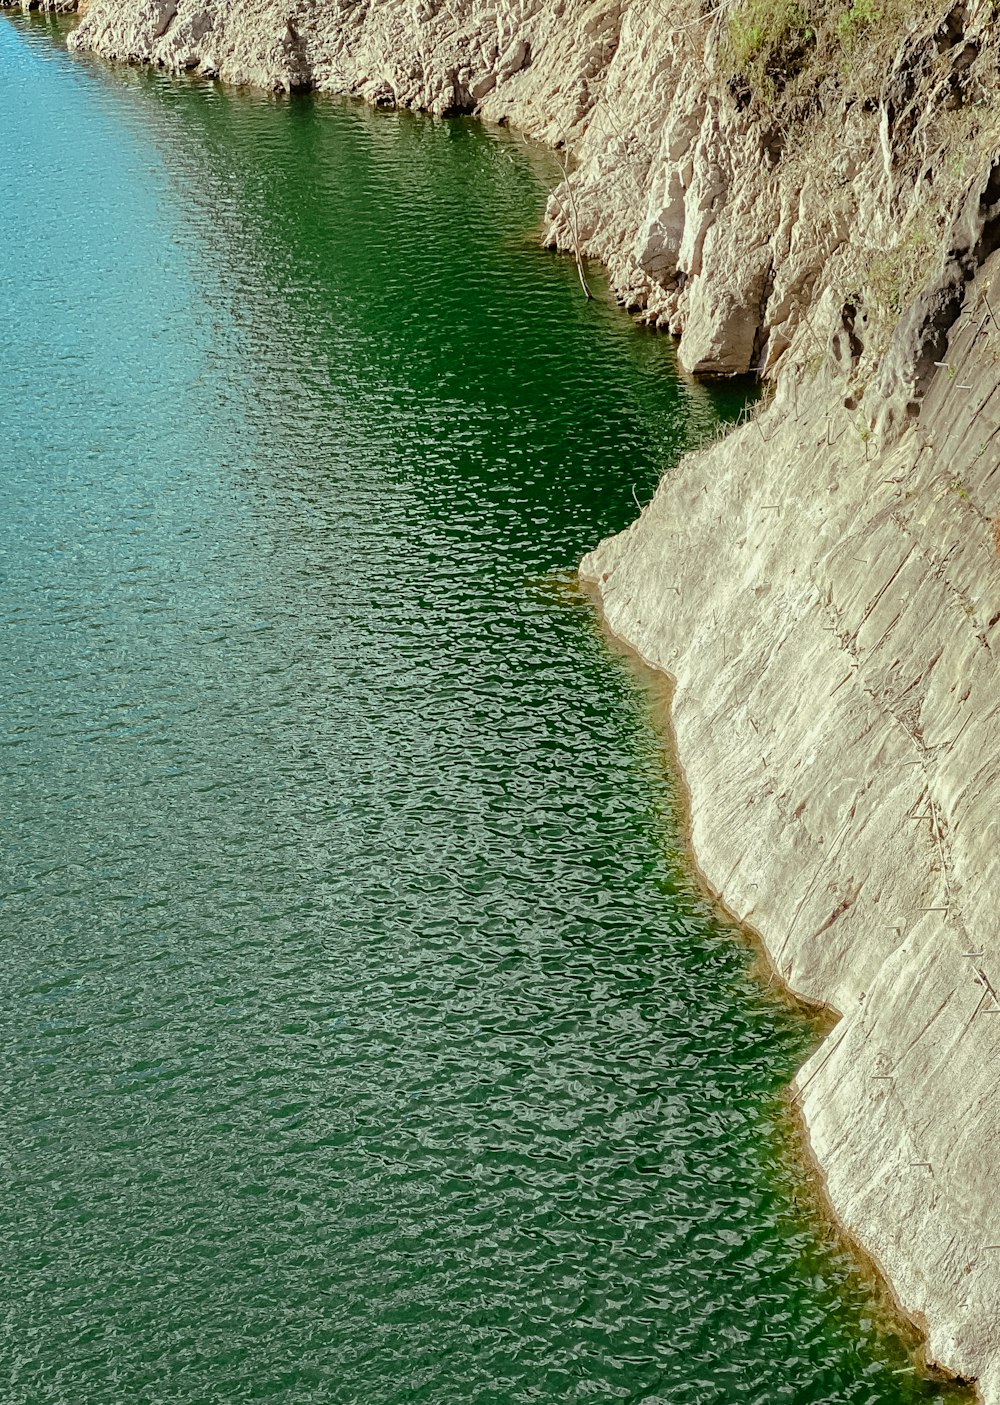 a large body of water surrounded by a rocky cliff